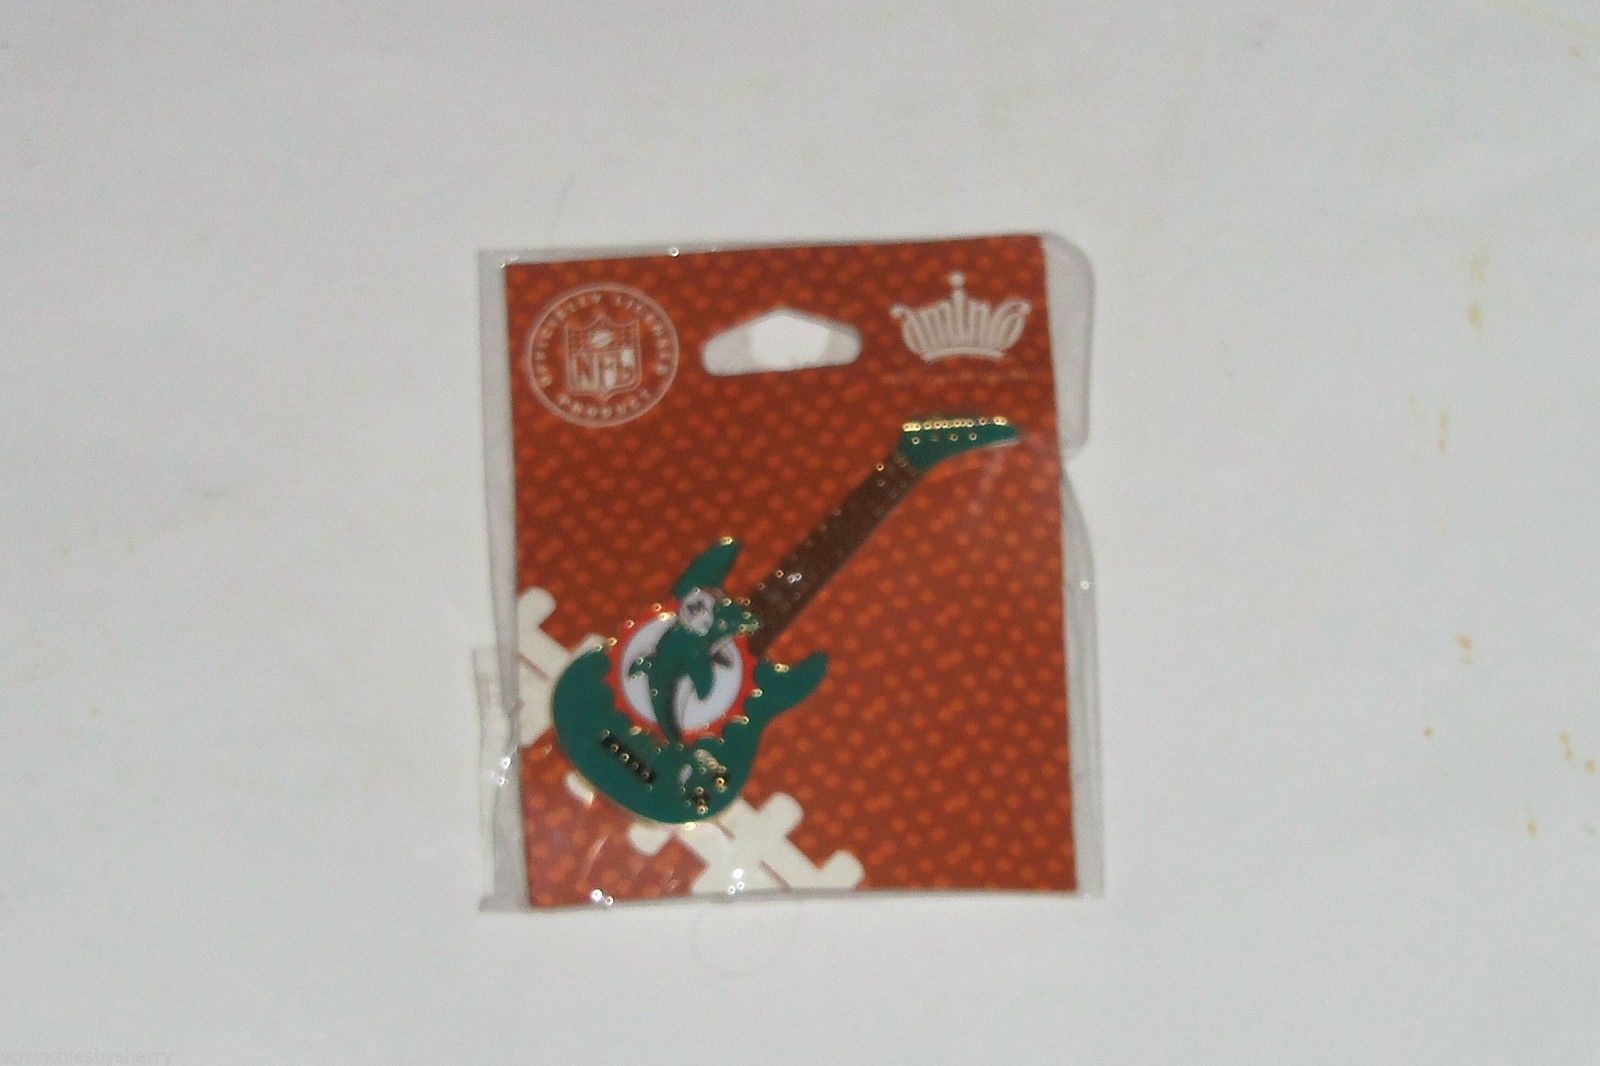 Miami Dolphins Guitar Pin Hat Lapel NFL Football Vintage - $14.95